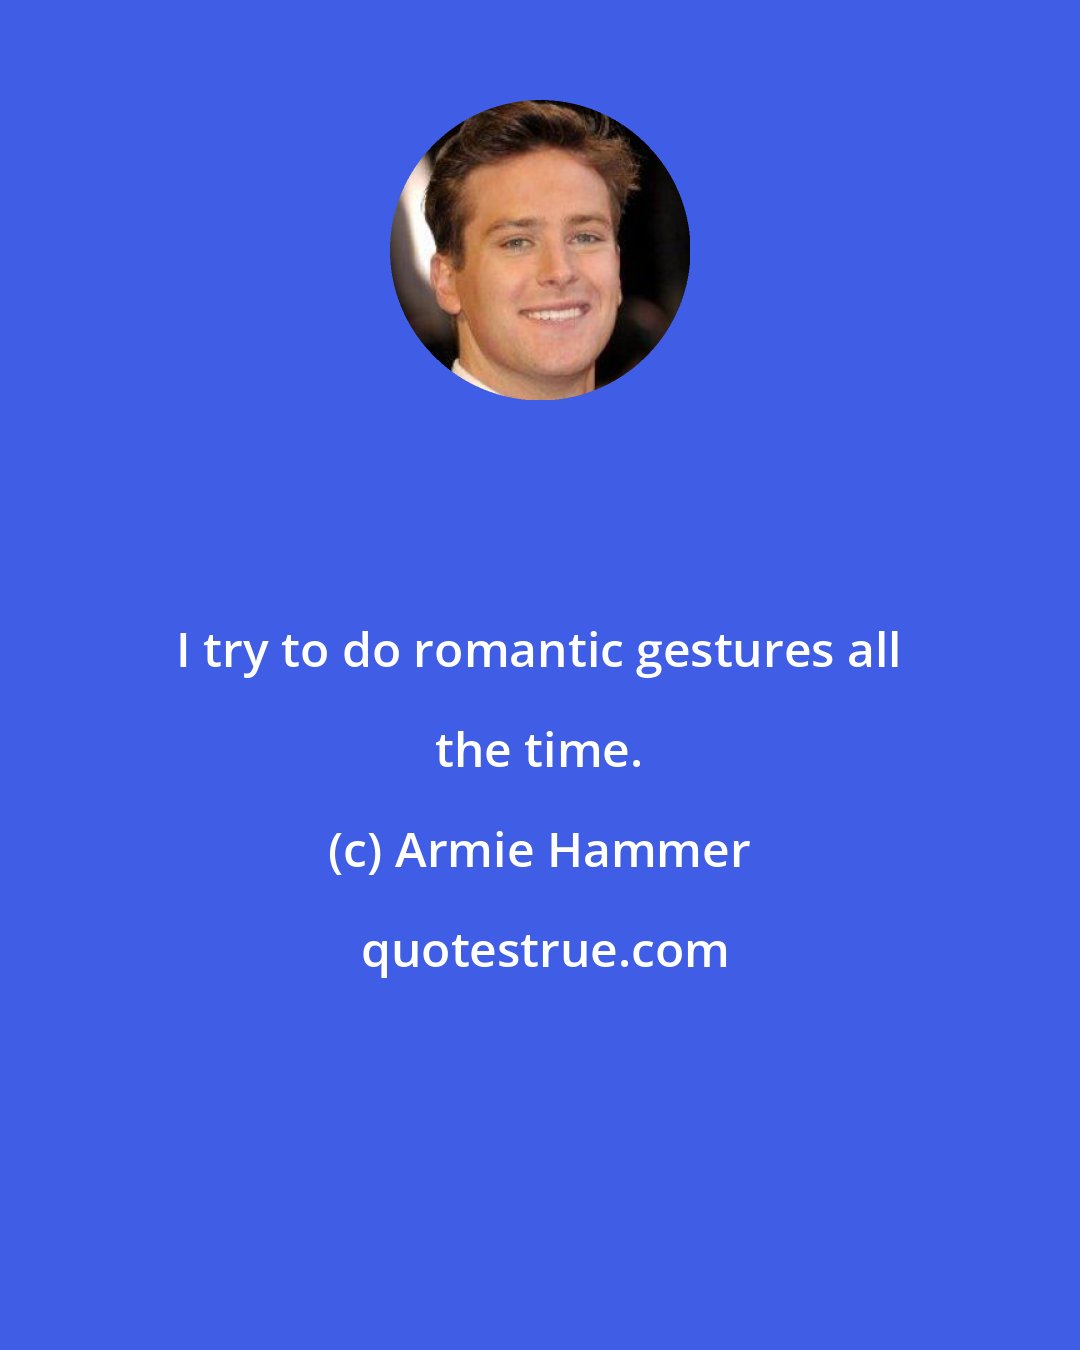 Armie Hammer: I try to do romantic gestures all the time.